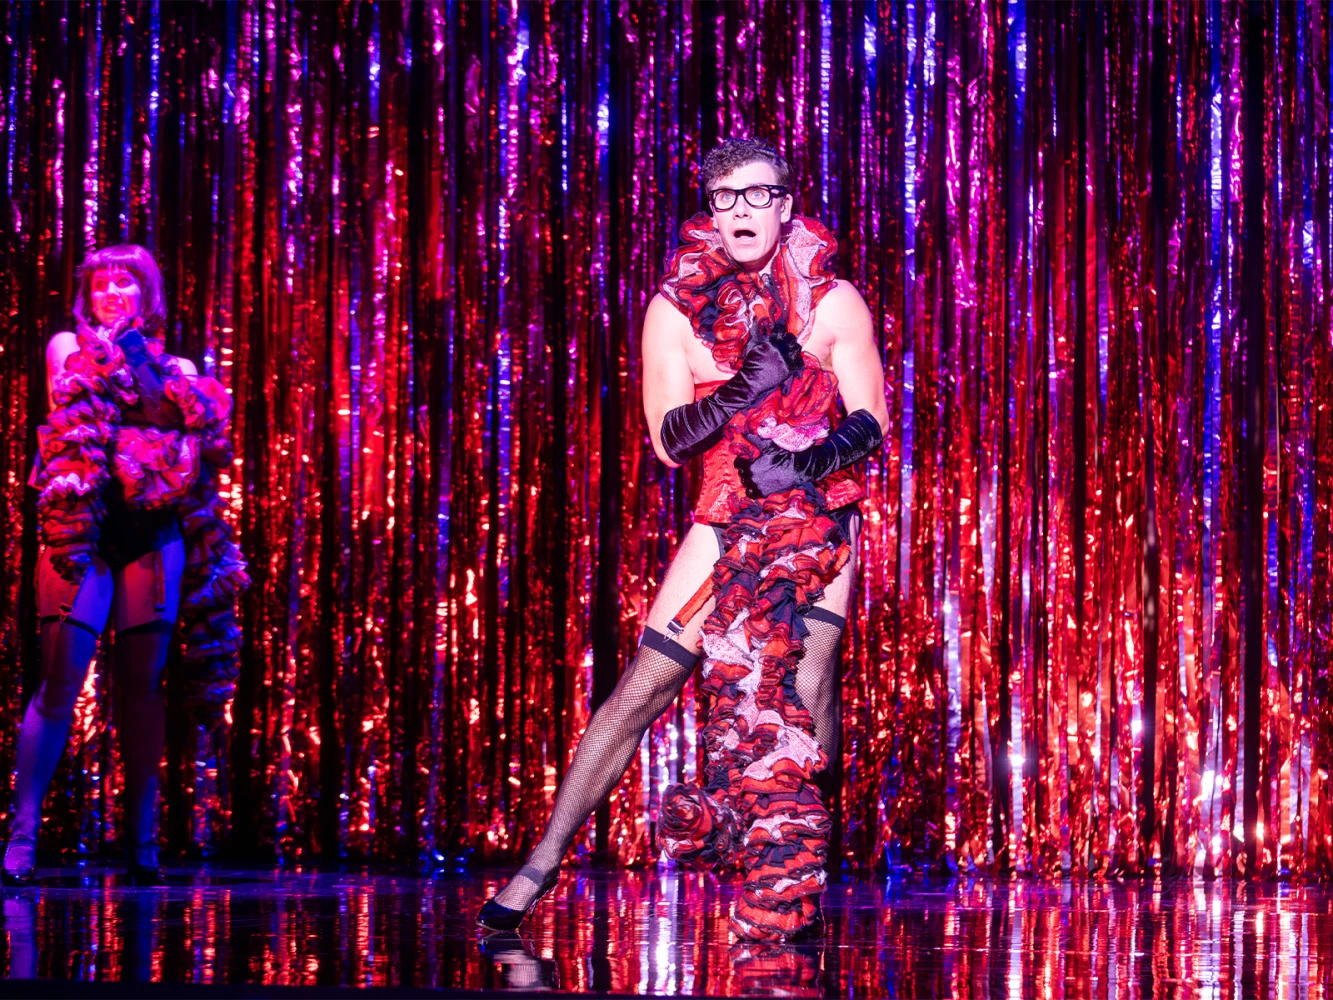 The Rocky Horror Show: What to expect - 10